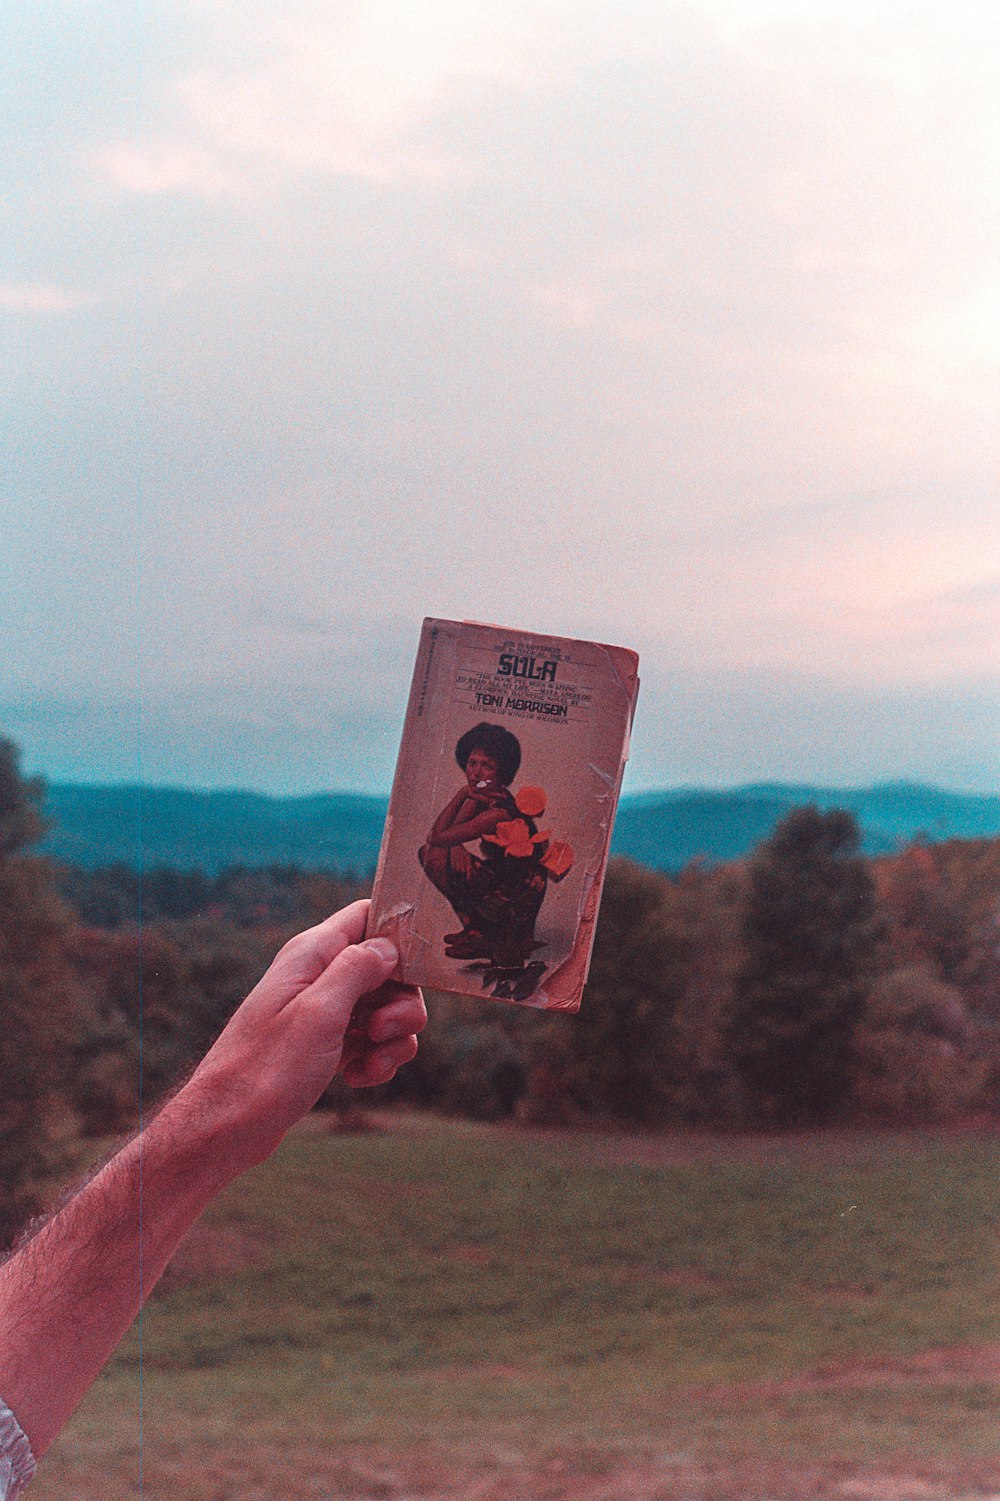 a person holding up a book in front of a field